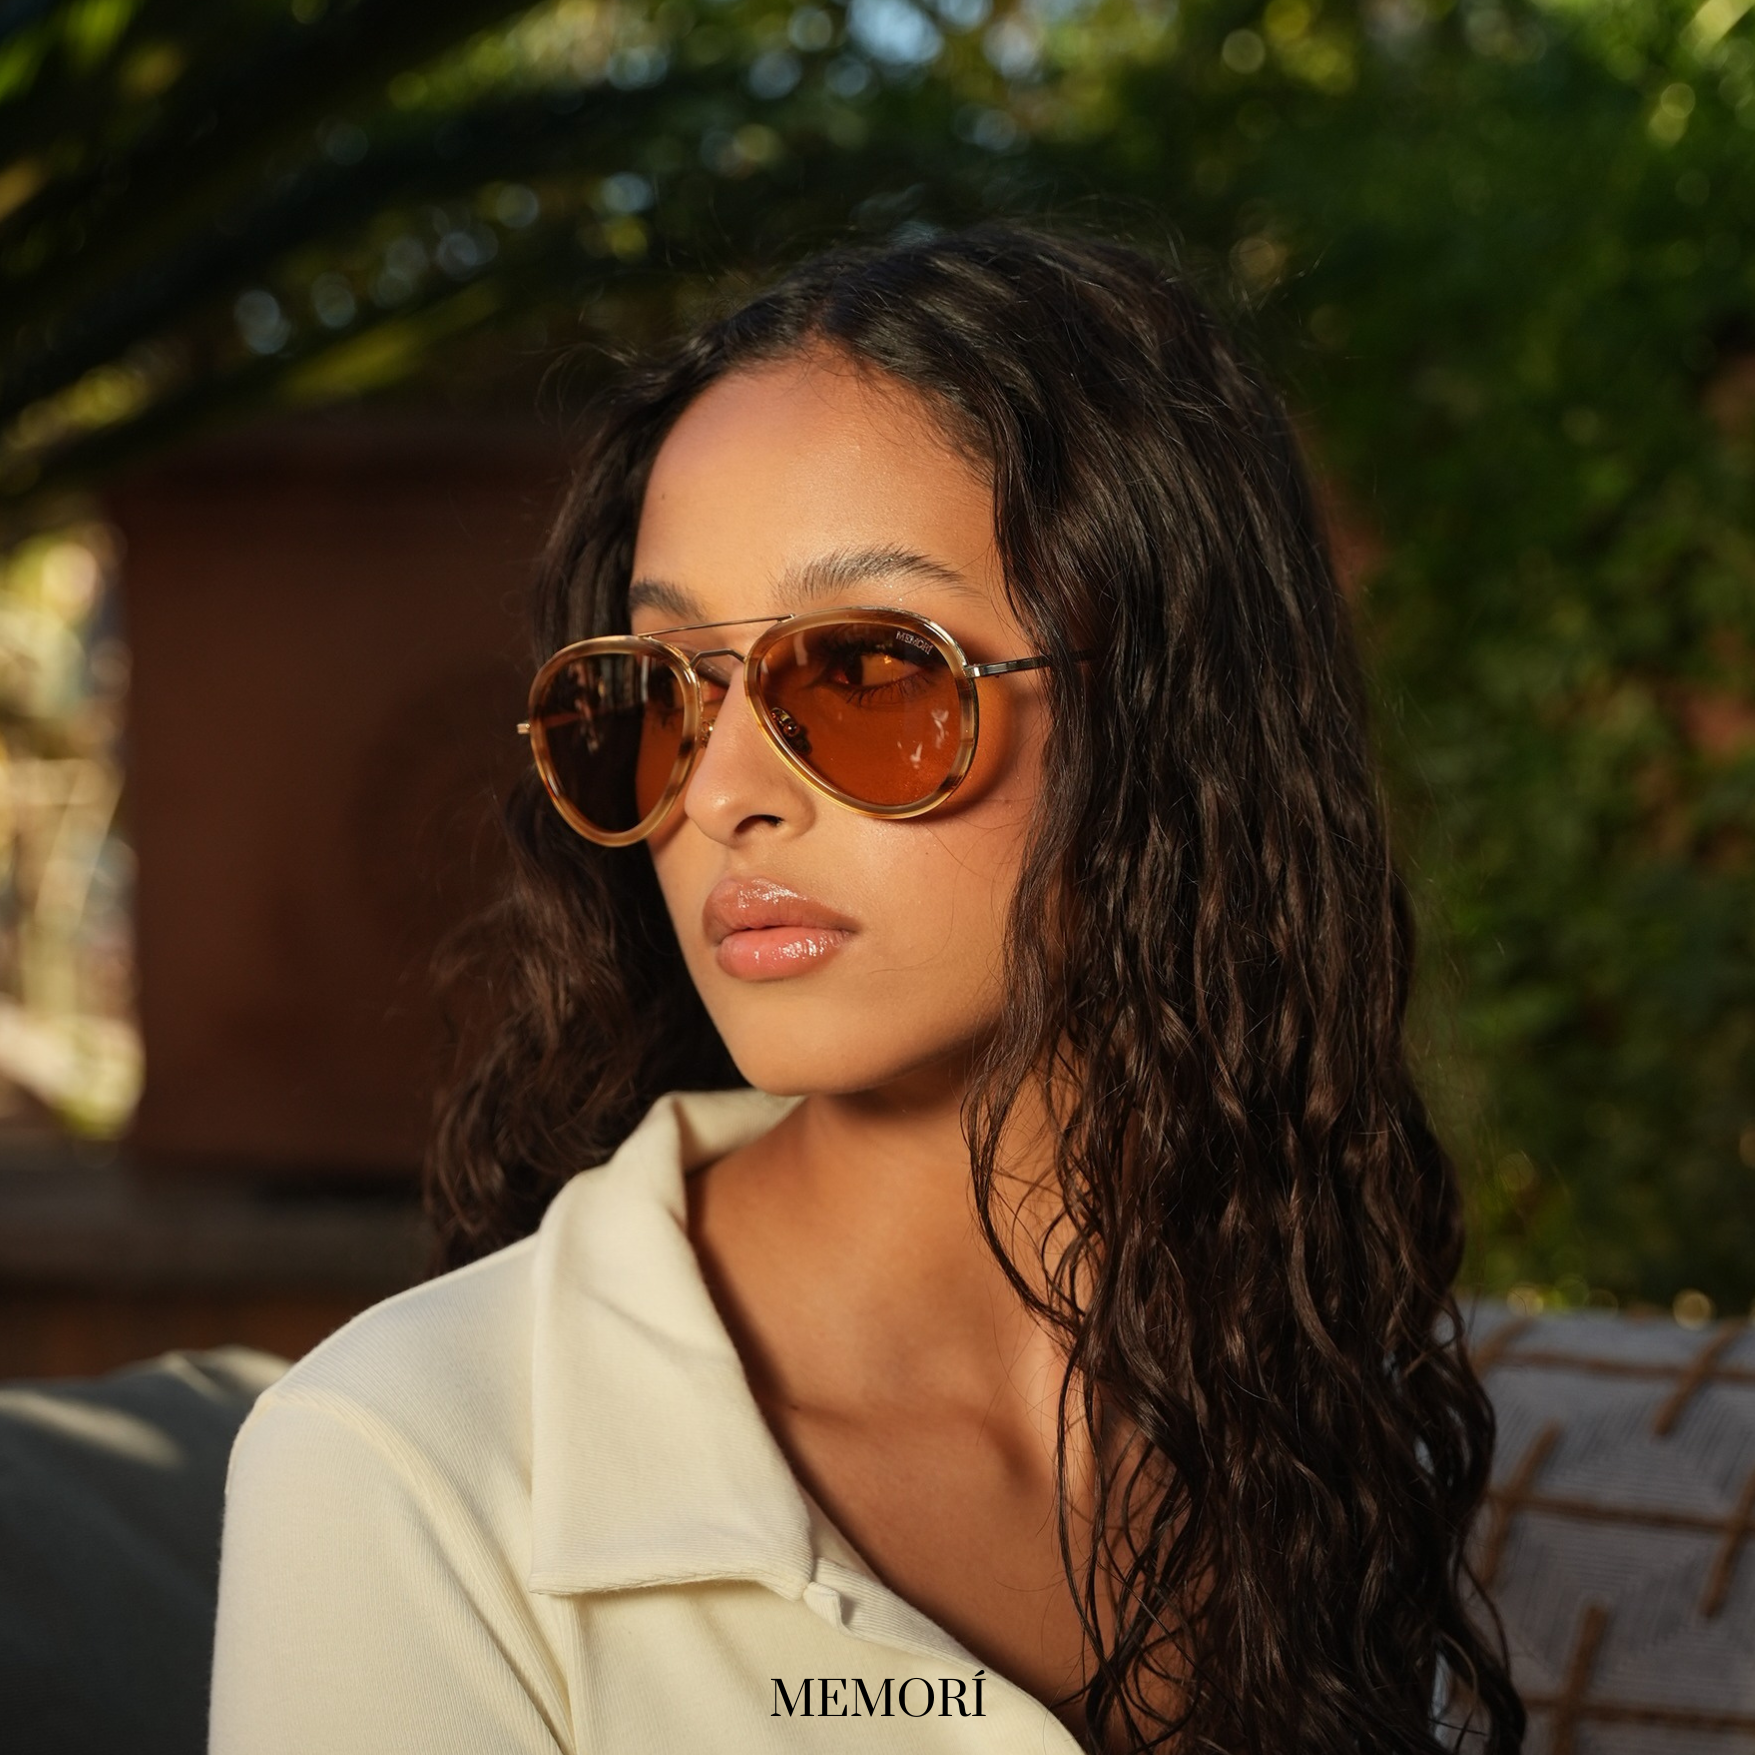 Image of model wearing small fit aviator sunglasses with light brown, almost yellow lenses. Aviators have a tortoise shell pattern acetate rim, and are smaller than the average pair of sunglasses to complement the model's petite face and features. 